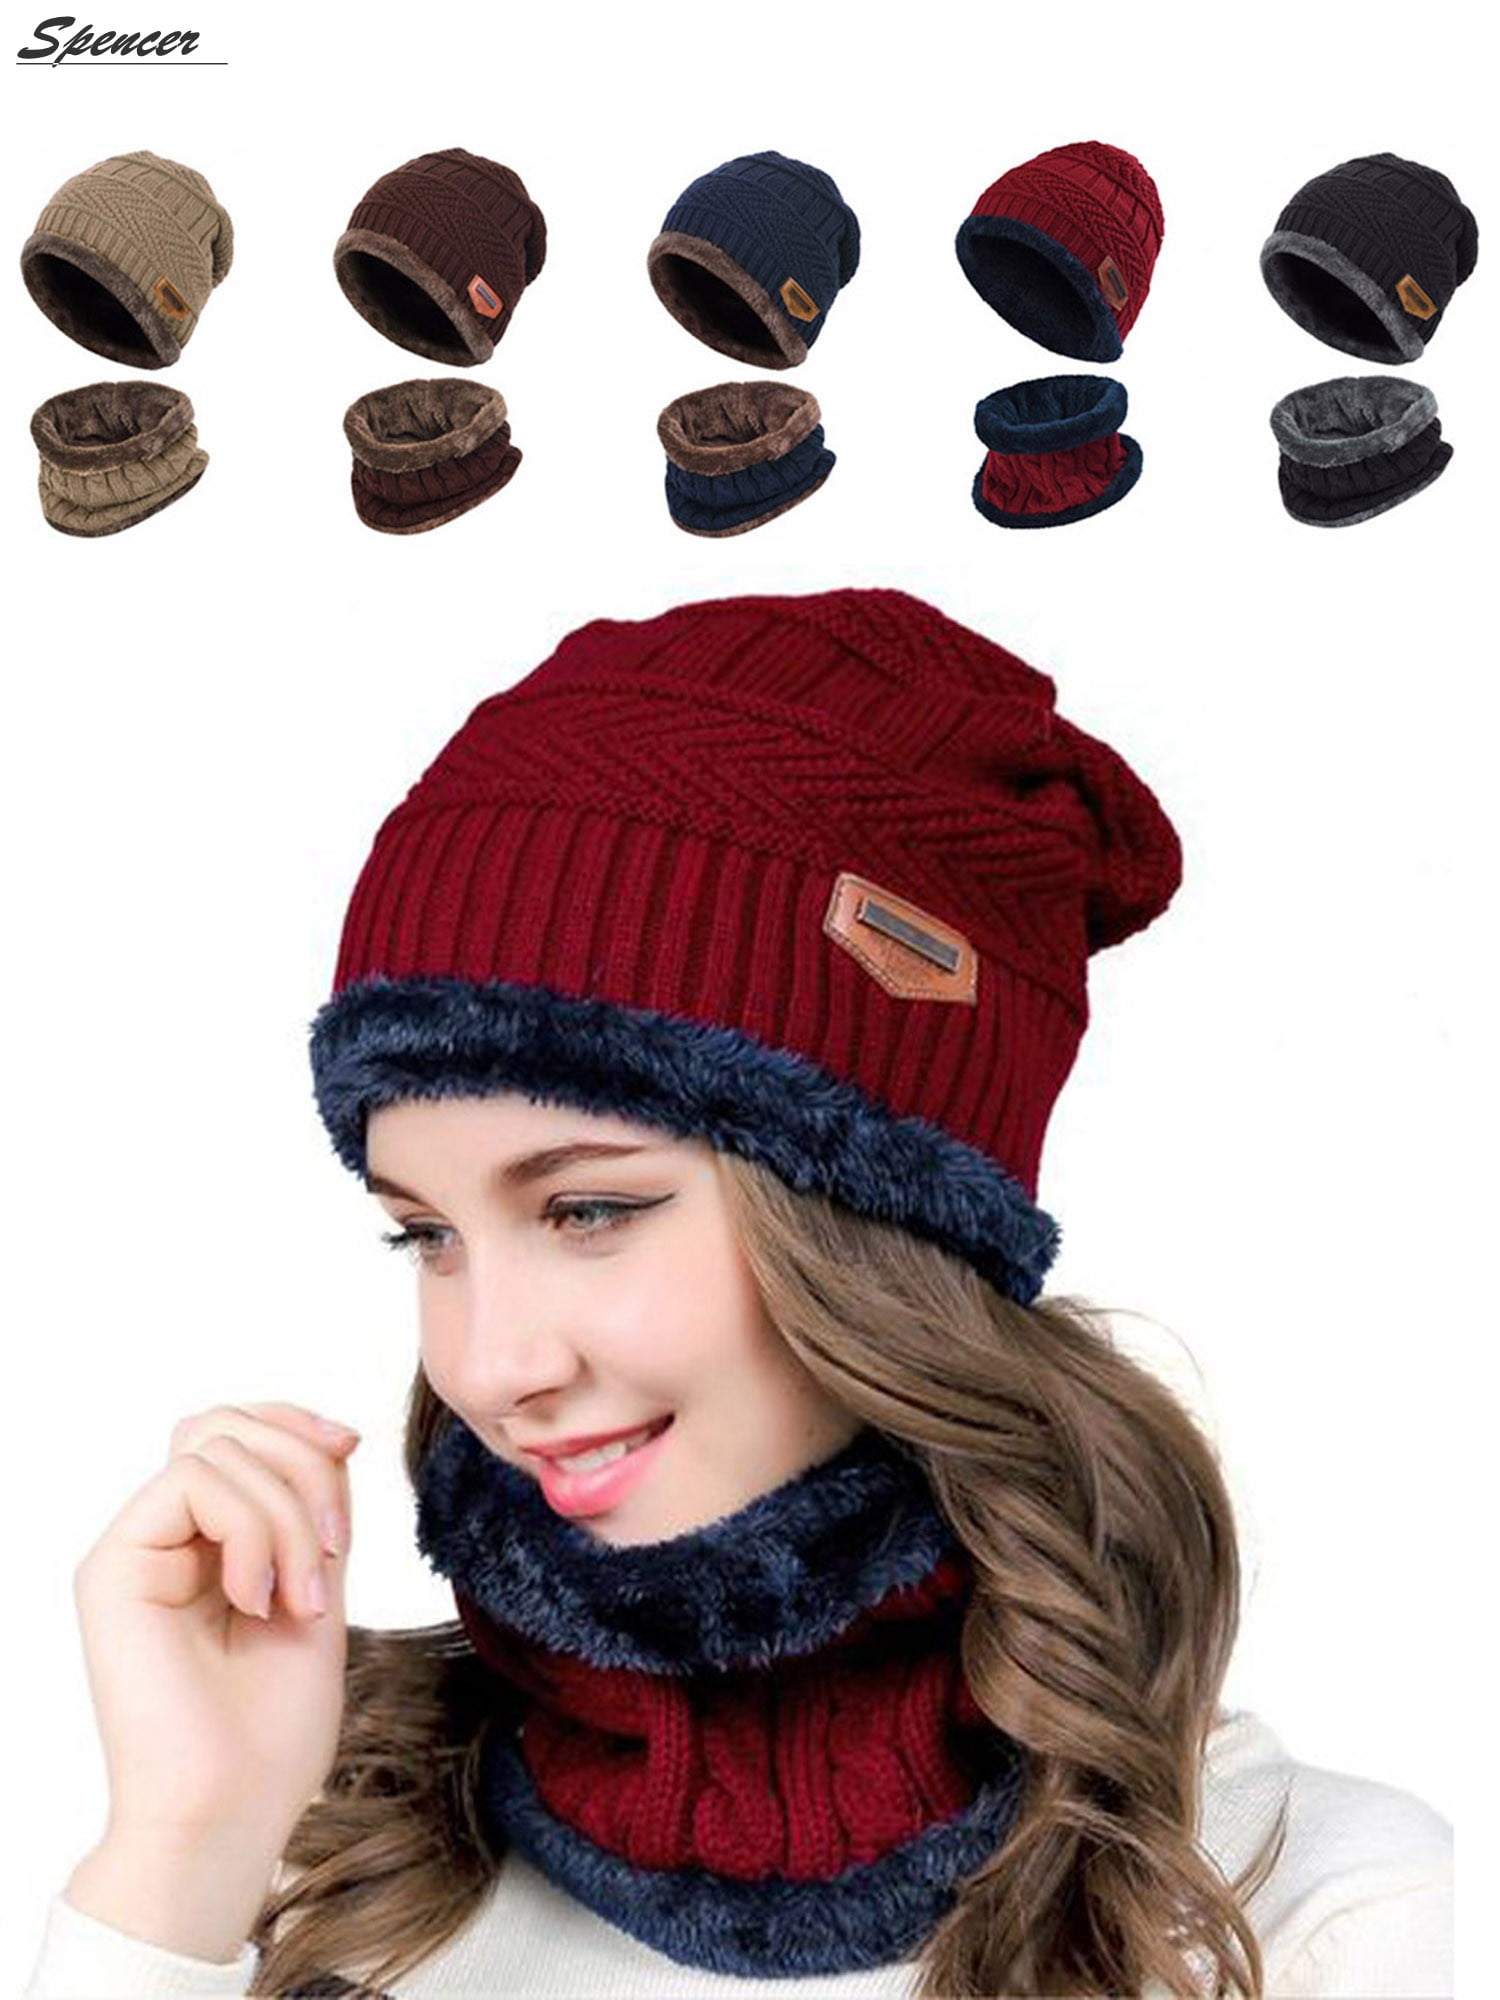 Spencer 2Pcs Winter Beanie Hat Scarf Set Lined Warm Knitted Hat Thick Skull  Cap for Men Women Blue 